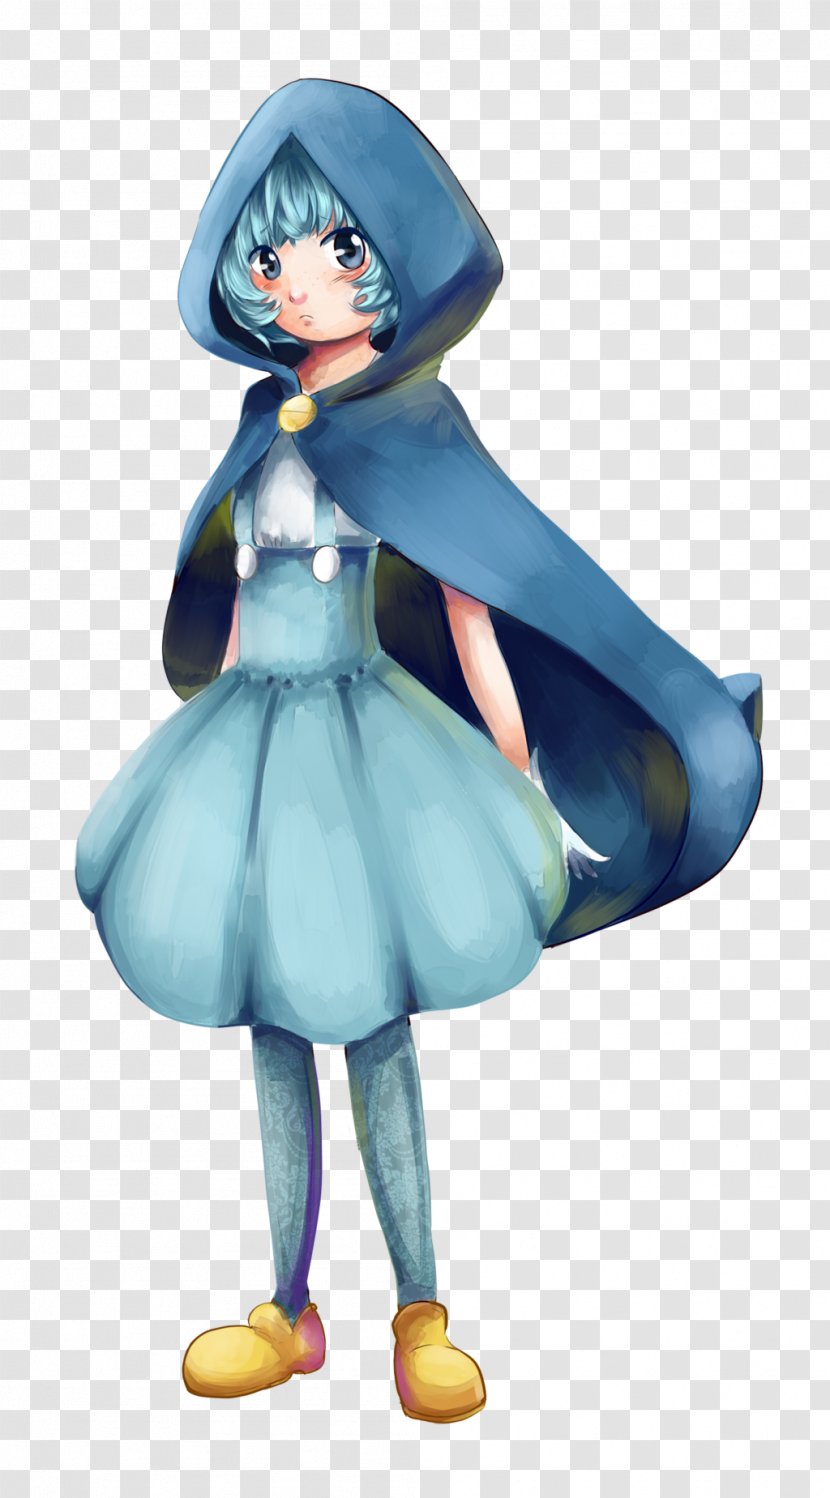 Piplup Pokémon Mystery Dungeon: Explorers Of Sky Moe Anthropomorphism Fan Art - Tree - Pokemon Transparent PNG